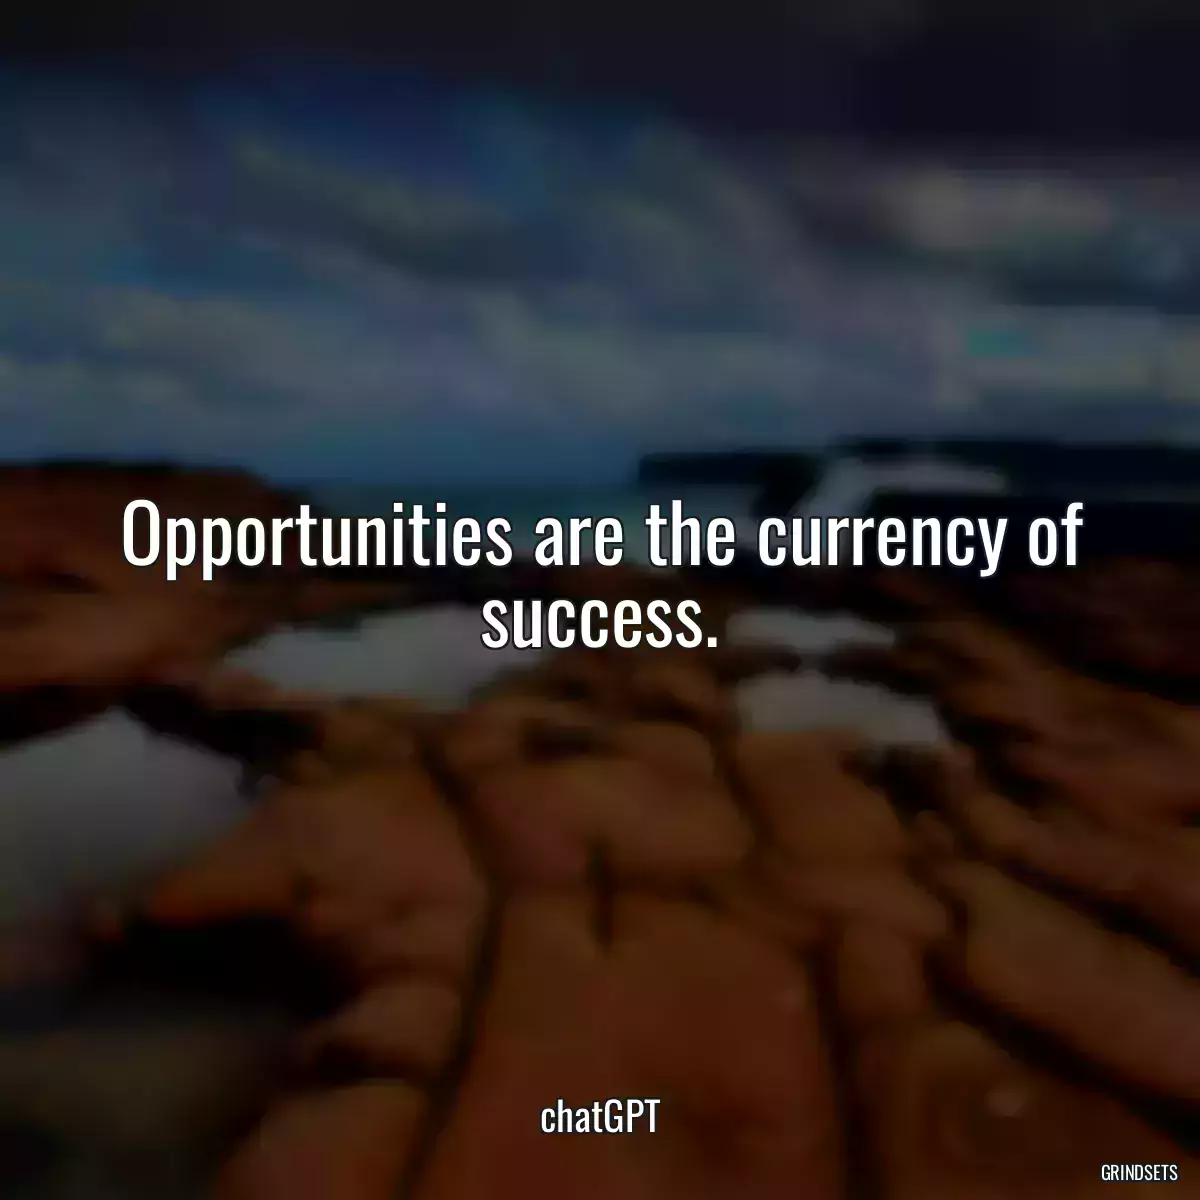 Opportunities are the currency of success.